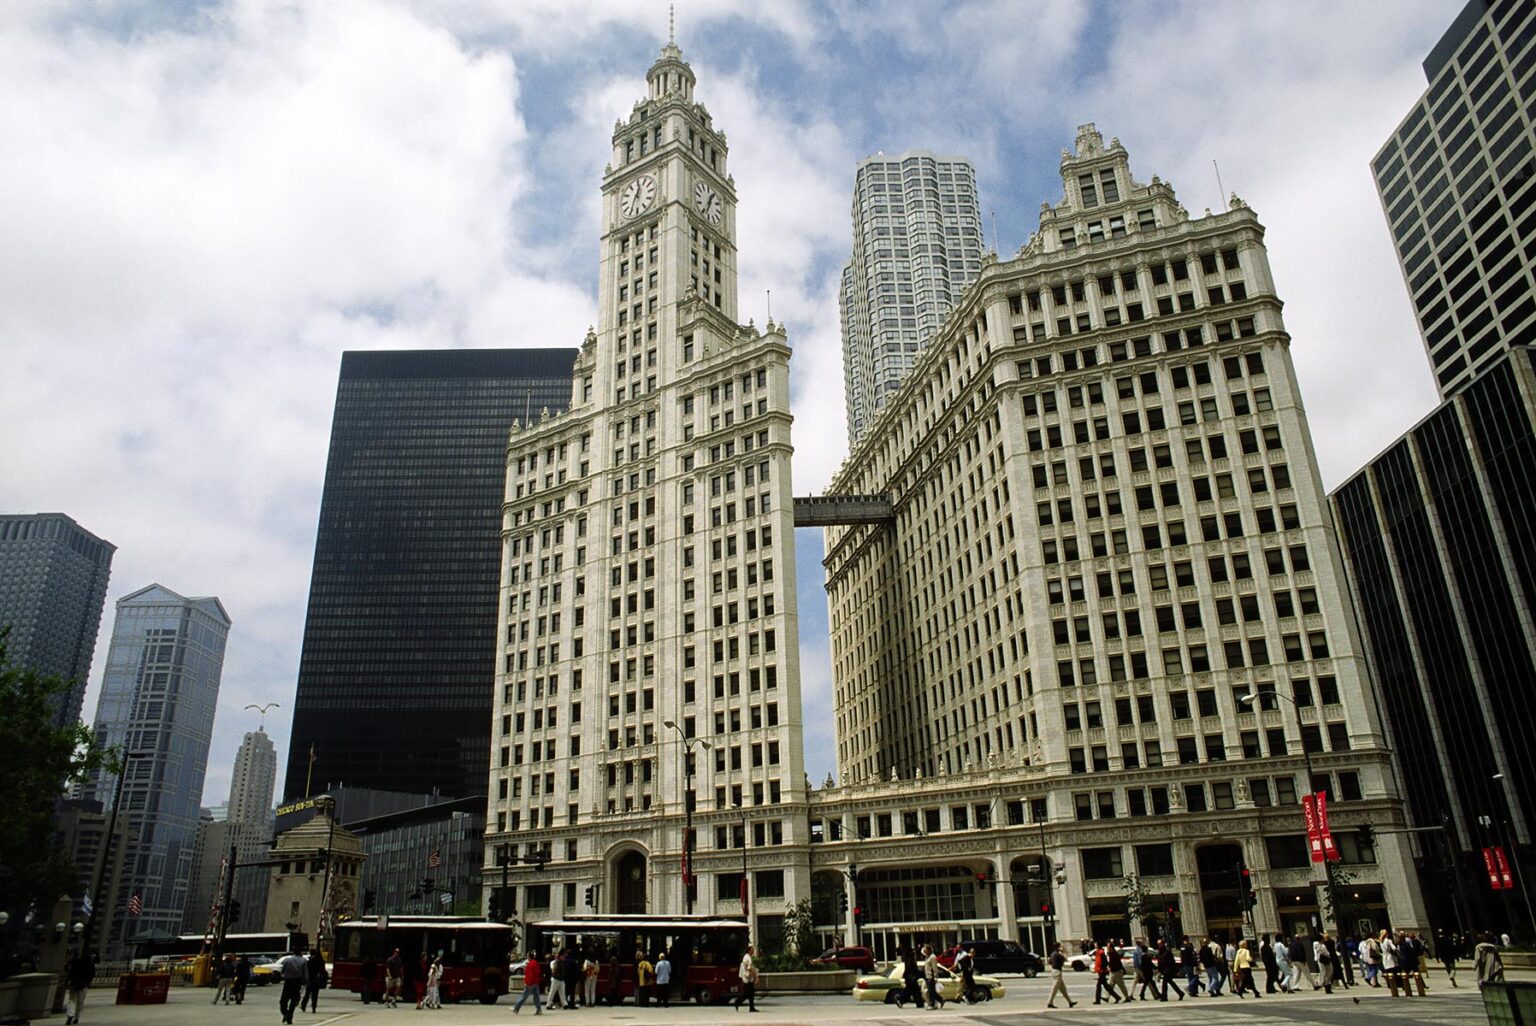 The WRIGLEY BUILDING with its unique upper and lower connecting walkways - CHICAGO, ILLINOIS